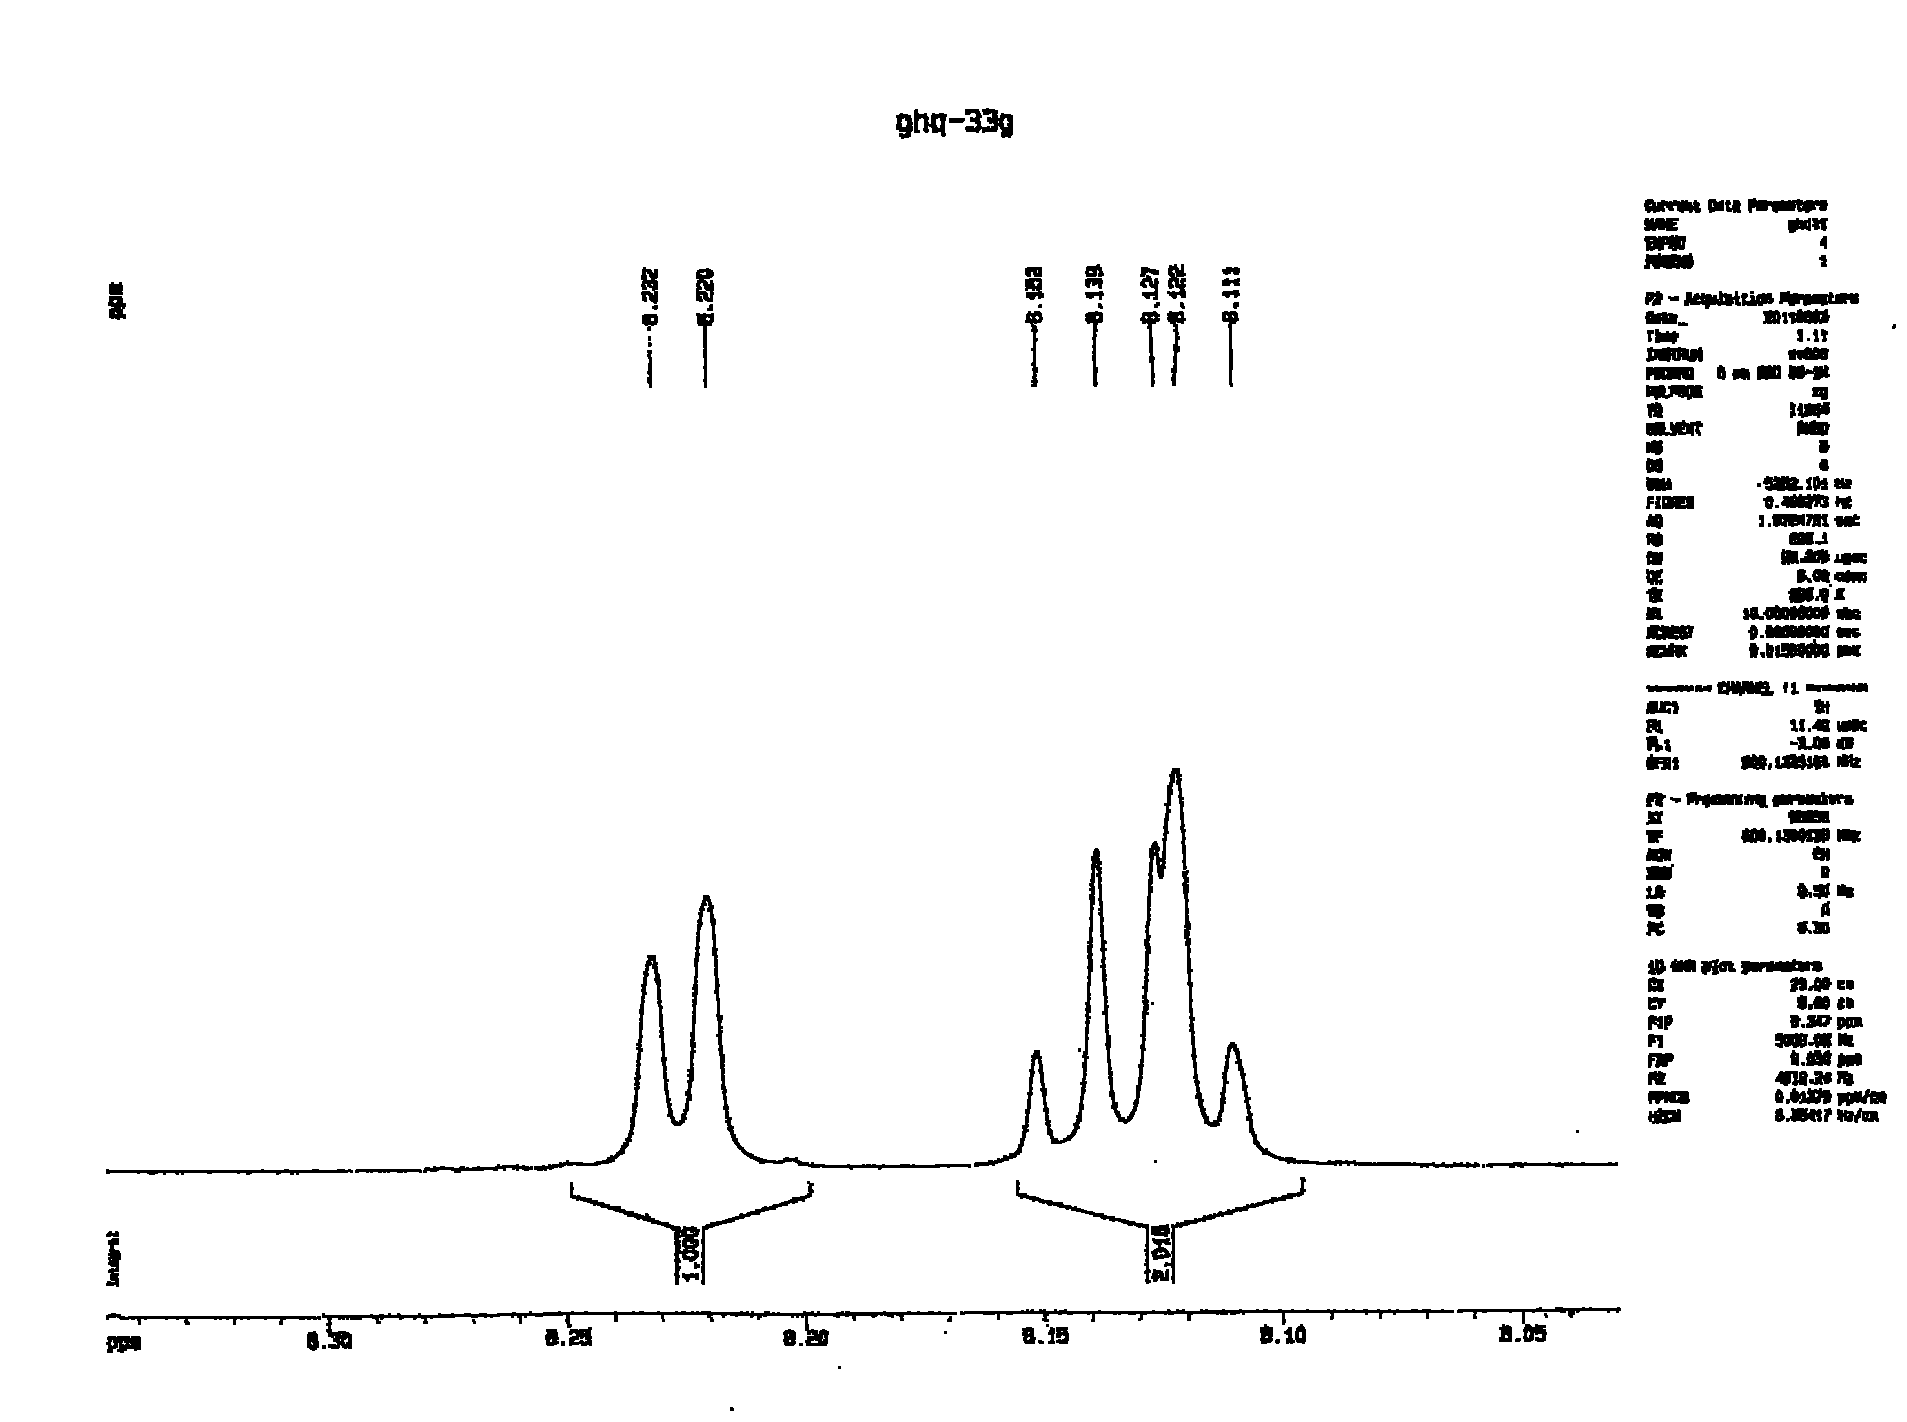 Method for preparing biphenyltetracarboxylic dianhydride (BPDA)